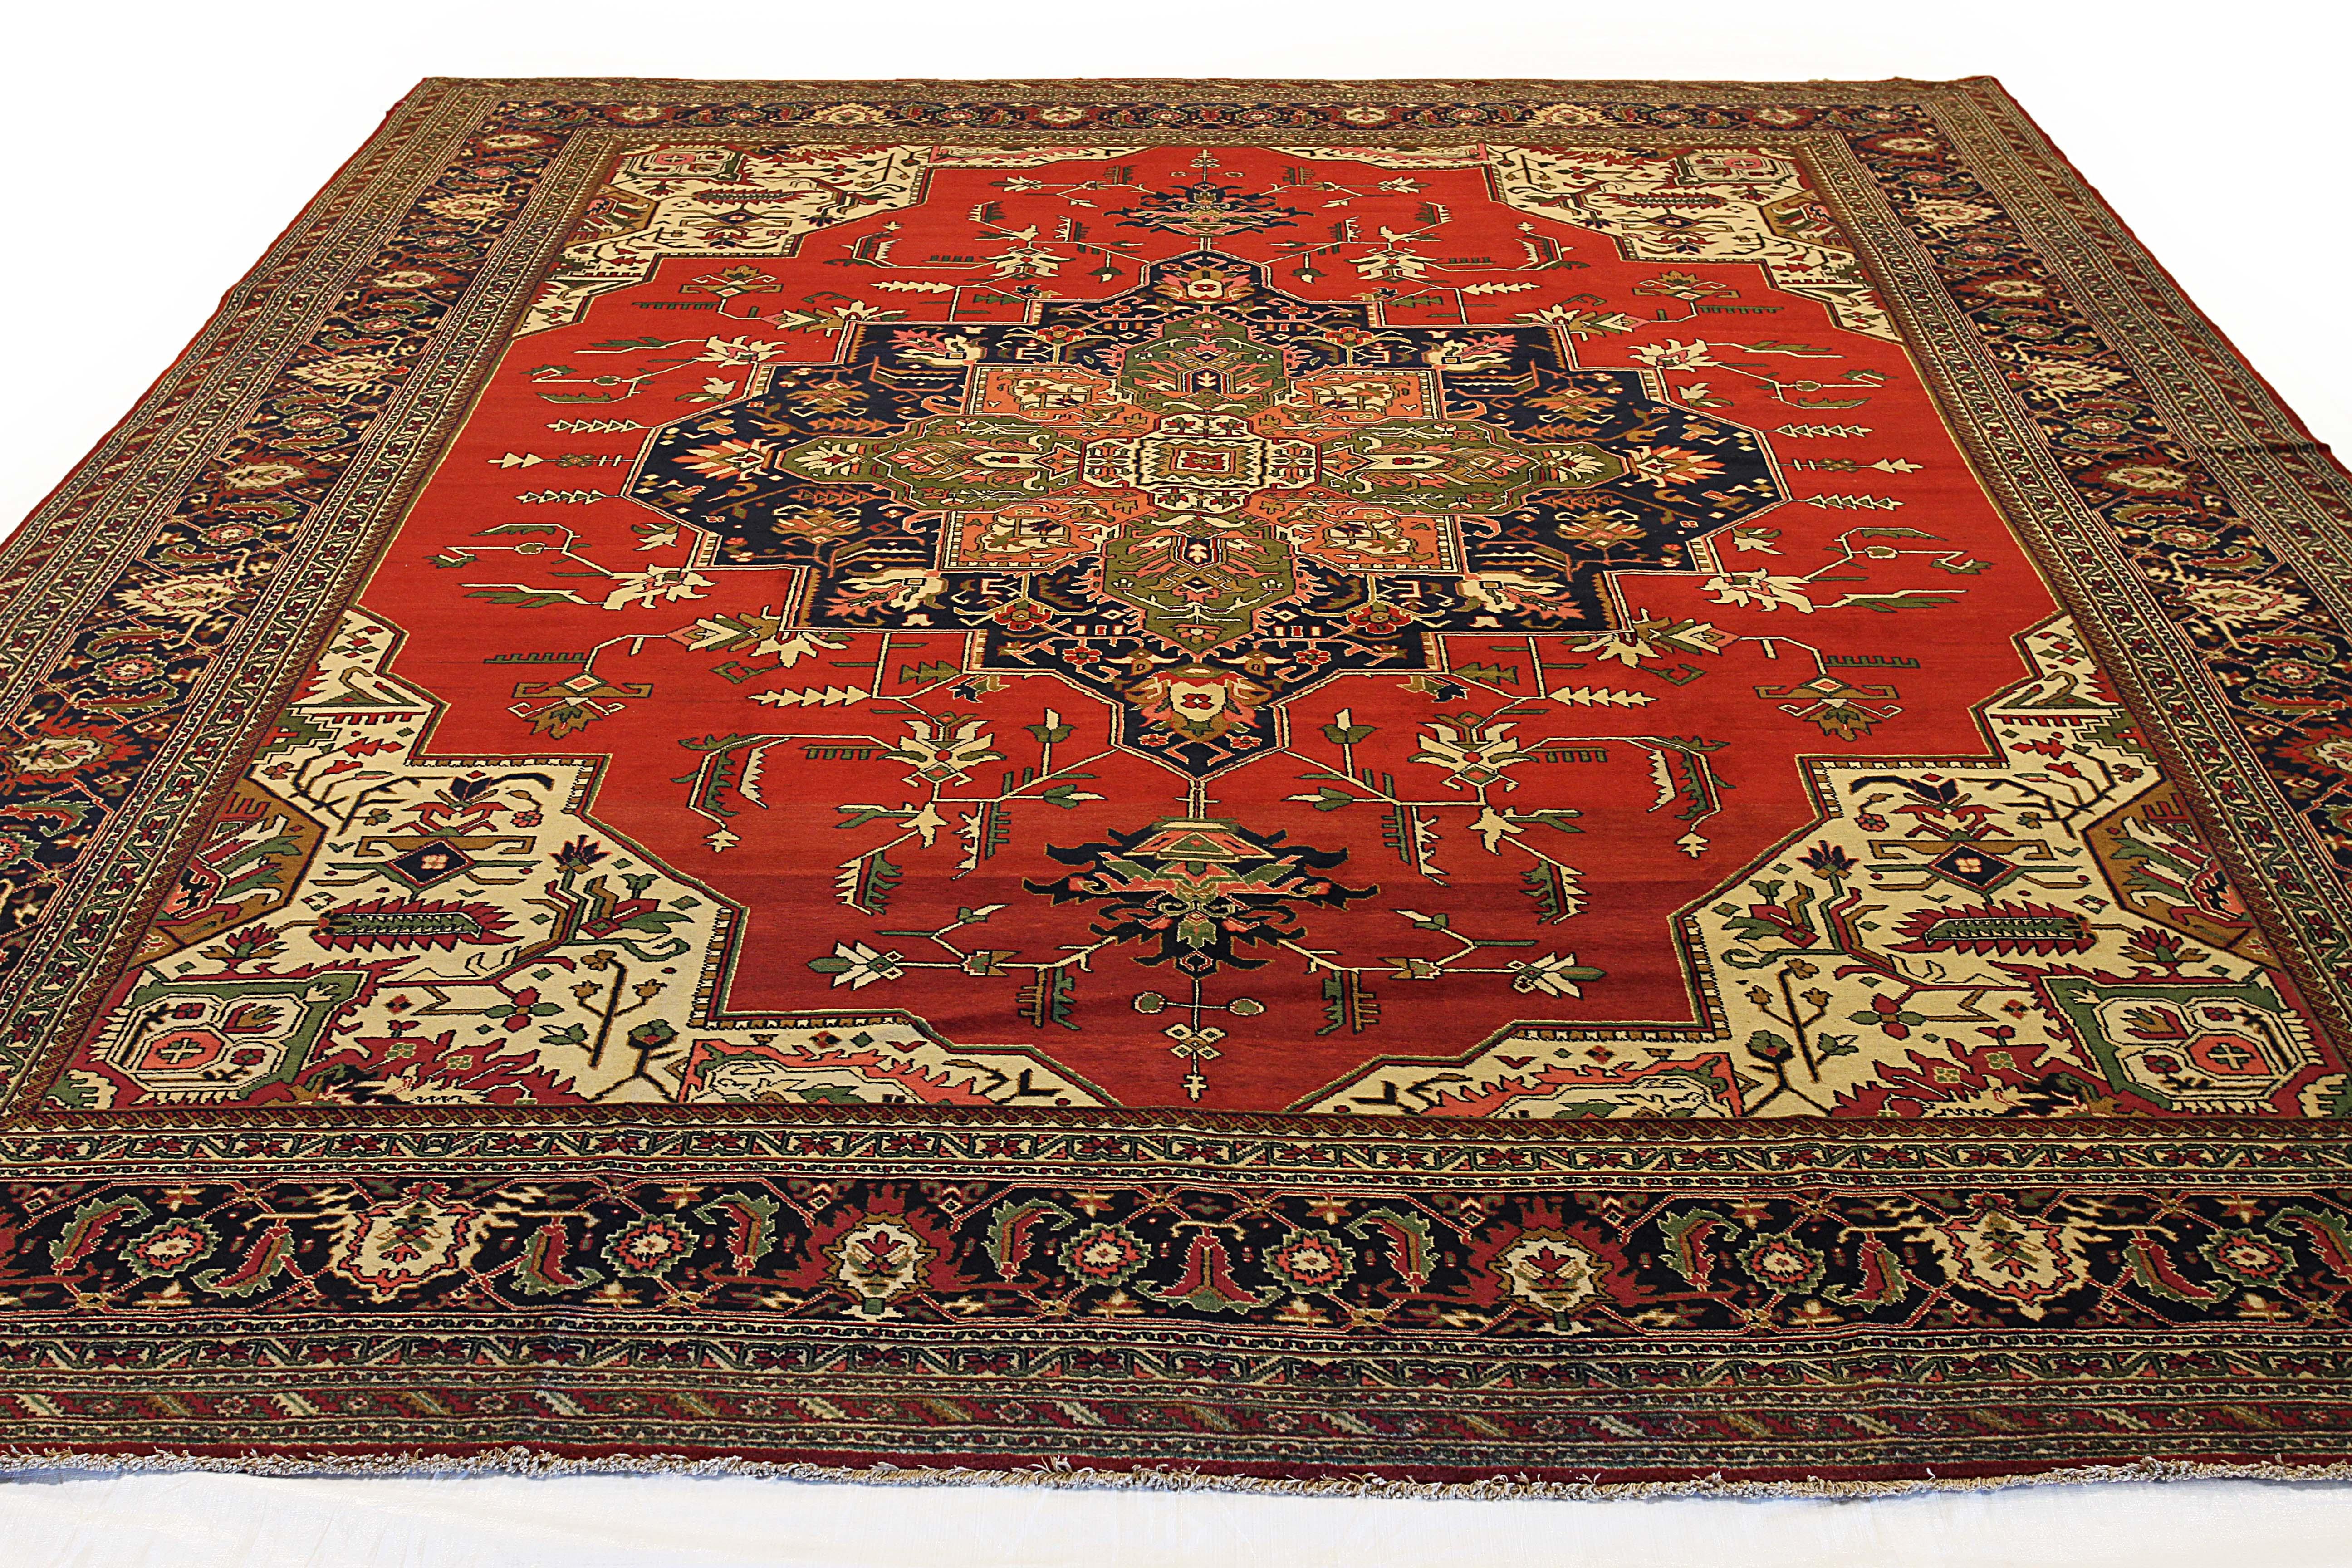 Mid-20th century hand-woven Persian area rug made from fine wool and all-natural vegetable dyes that are safe for people and pets. It features traditional Tabriz weaving depicting intricate botanical and animal patterns often in bold colors.